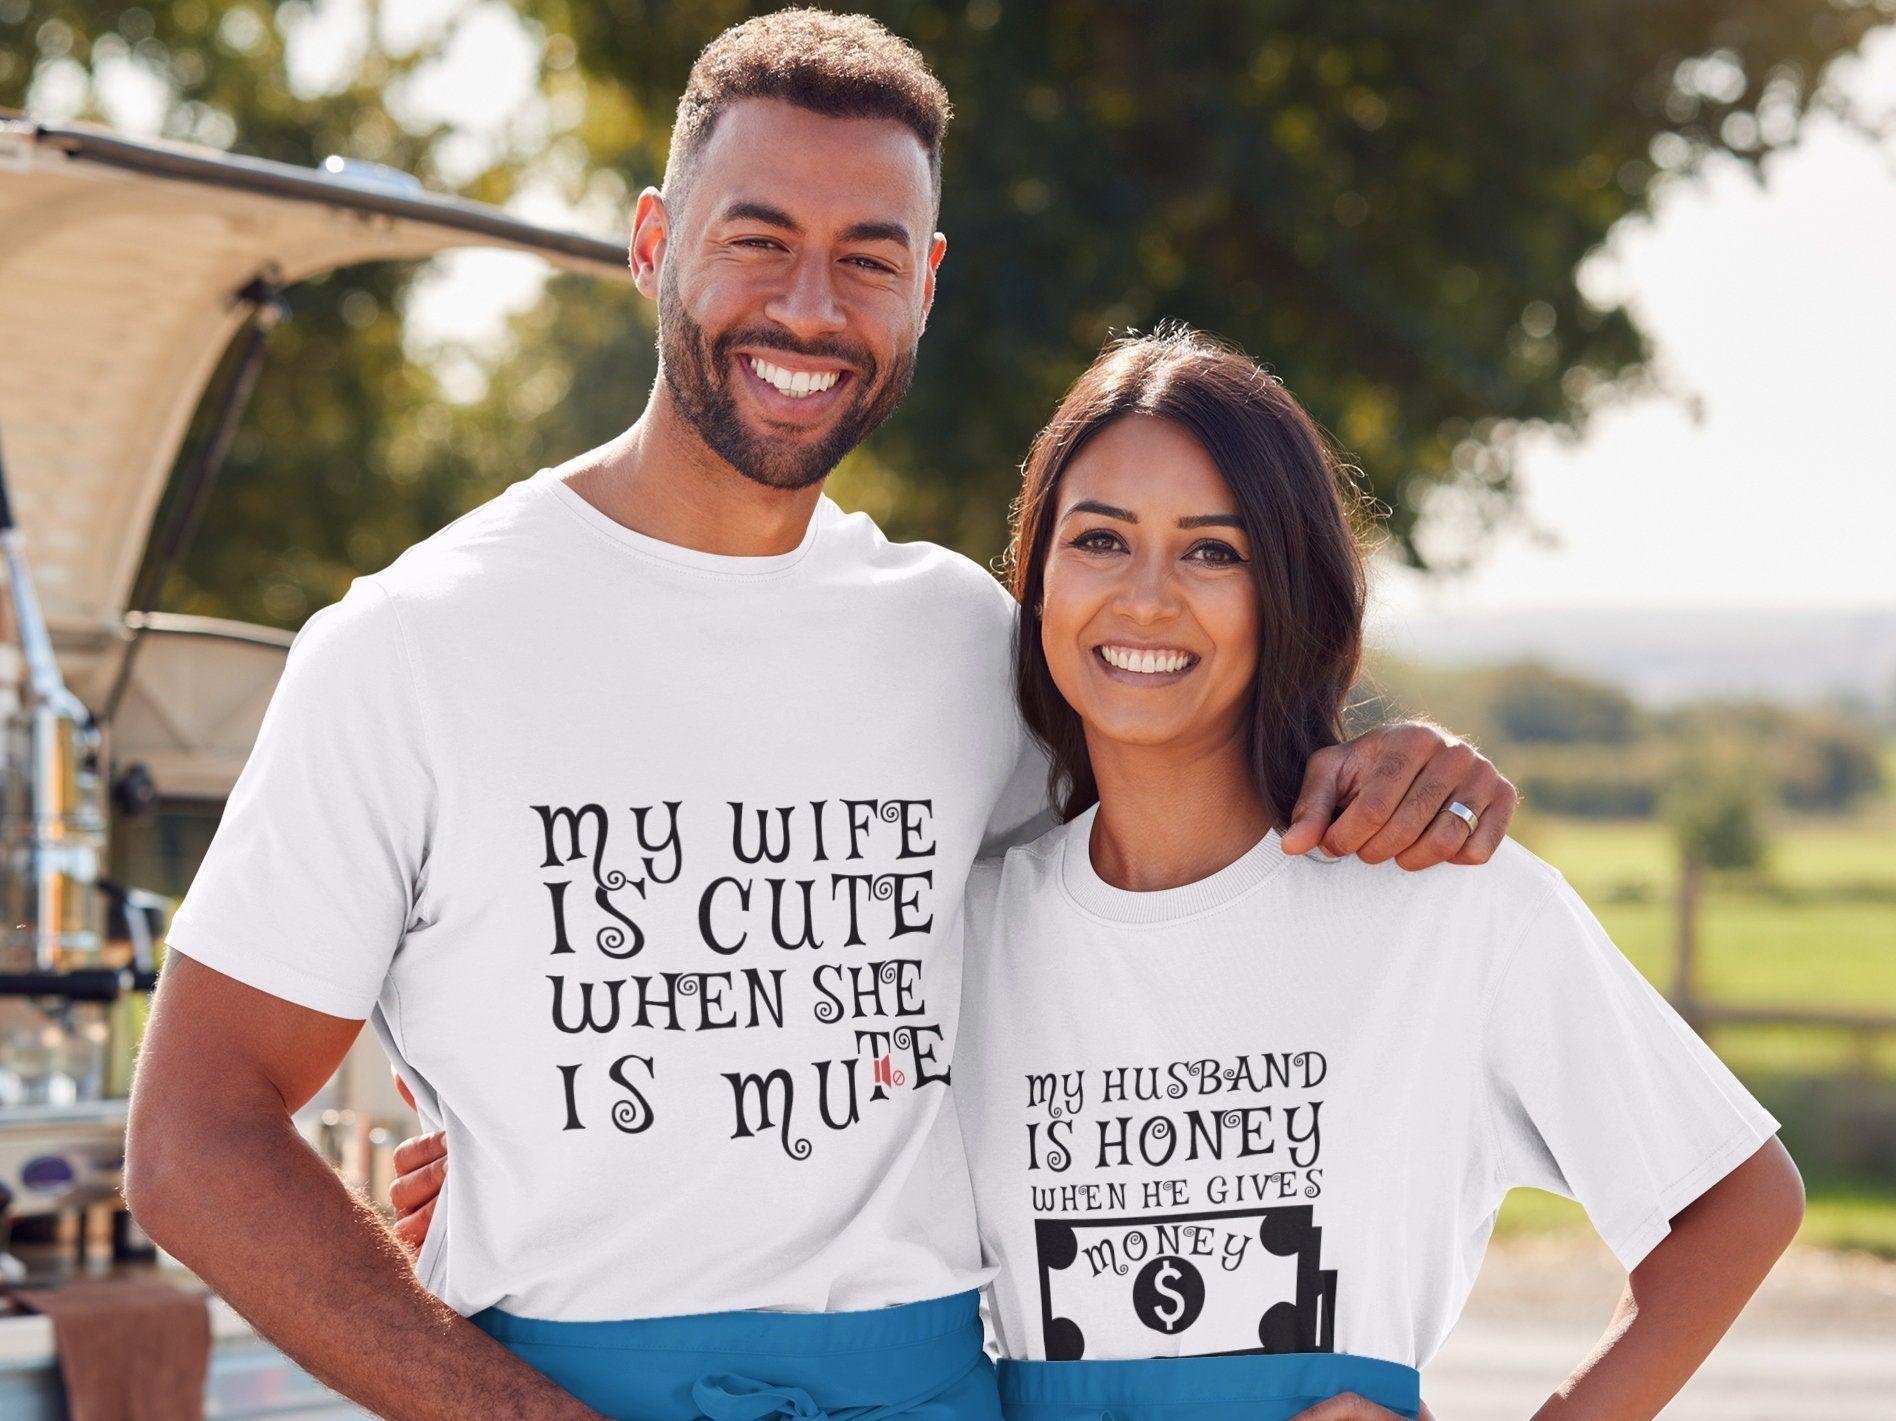 Honeymoon Vibes, Honeymoon Shirts, Honeymoon Vibes Shirt, Wife Shirt, Mr  and Mrs Shirts, Wedding Gifts, His and Hers Shirts - Etsy